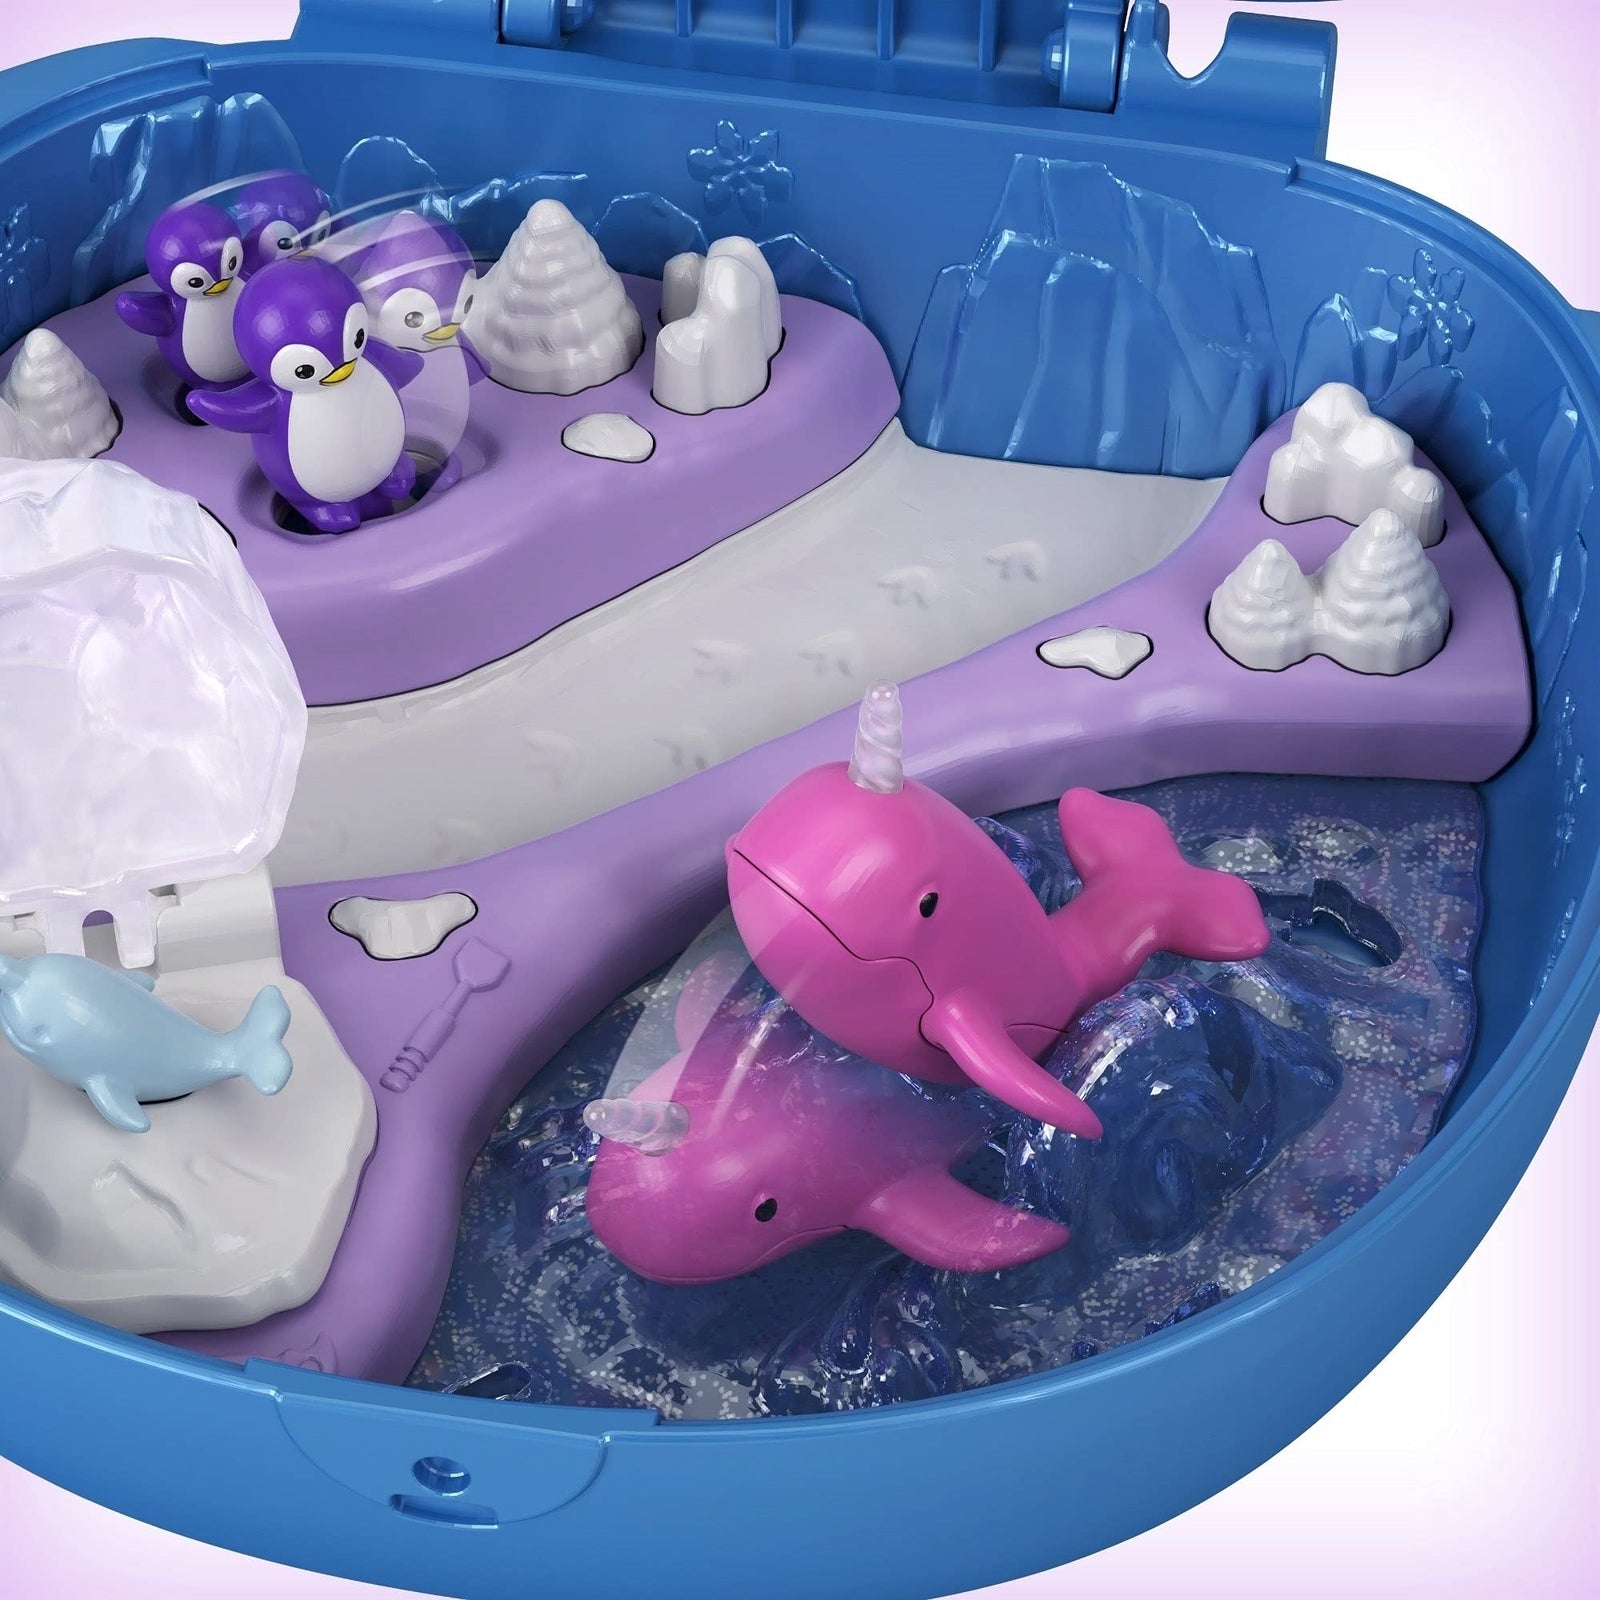 Polly Pocket Freezin' Fun Narwhal Compact with Fun Reveals, Micro Polly and Lila Dolls, Husky Dog & Sled, Polar Bear Figure & Sticker Sheet; for Ages 4 Years Old & Up